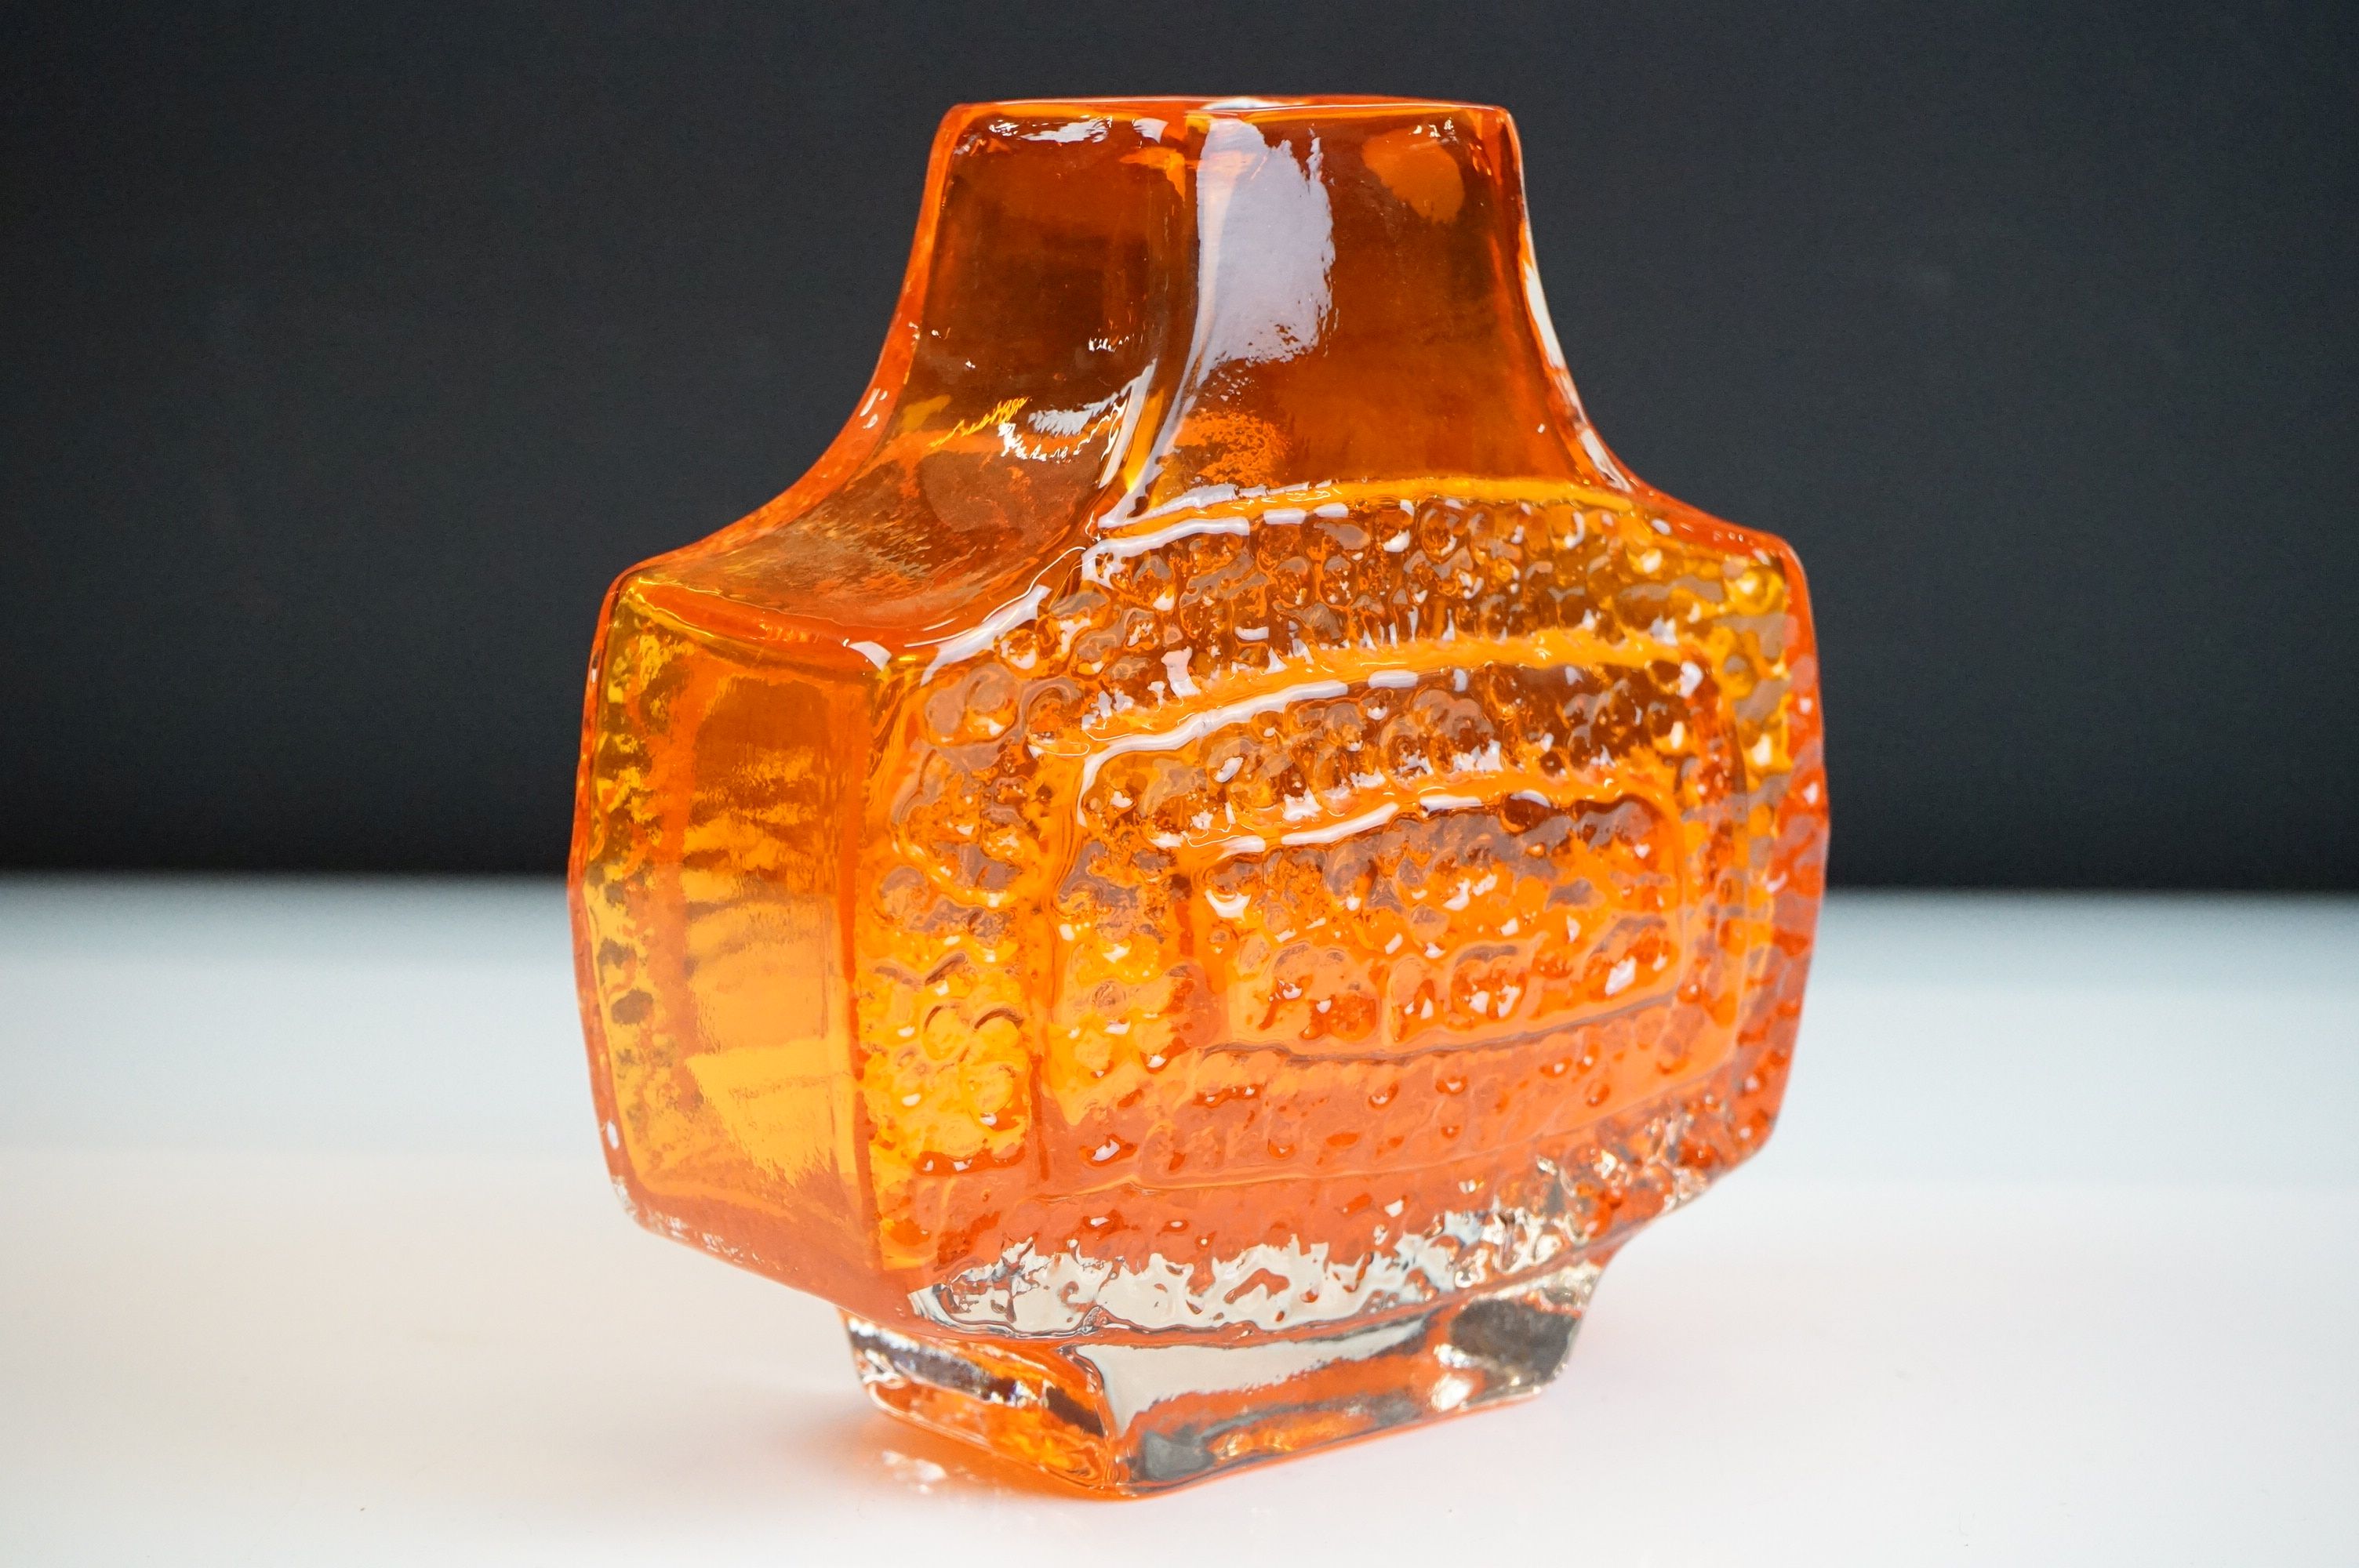 Whitefriars Textured Glass Concentric ' TV ' Pattern Vase, pattern no. 9677, in the Tangerine - Image 5 of 9